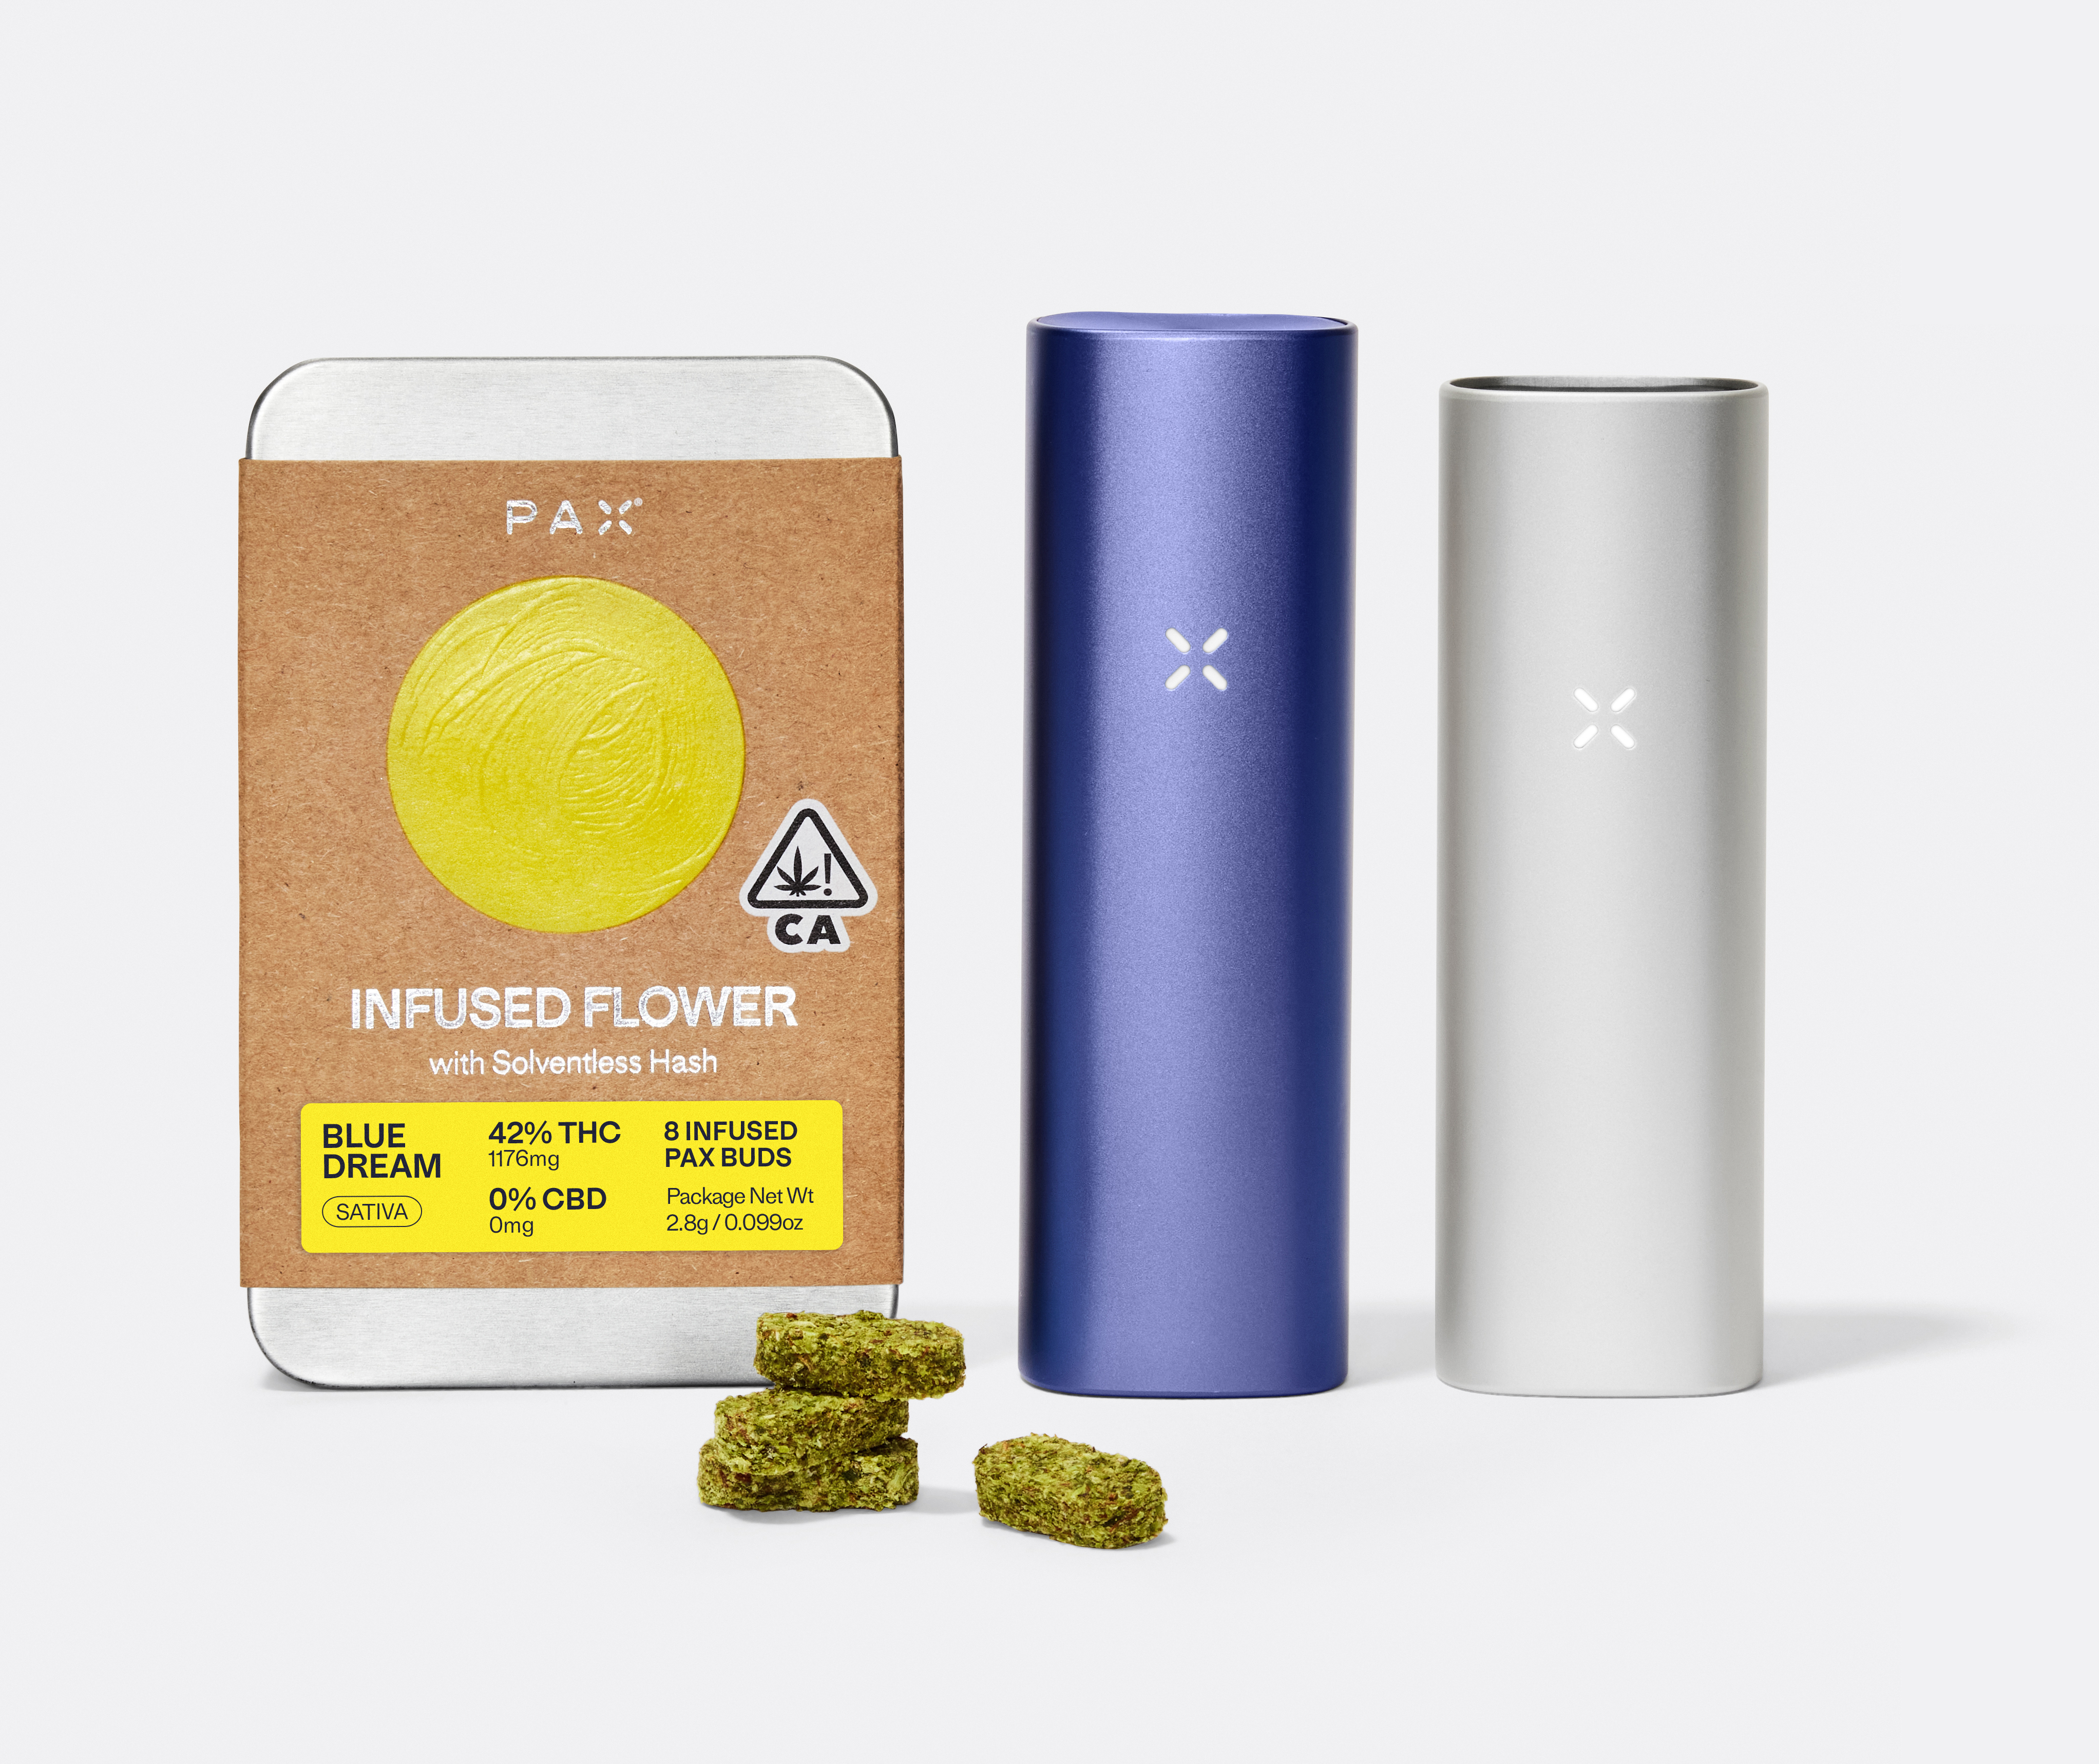 PAX Unveils All New Lineup for Cannabis Flower and Concentrate Vaporization